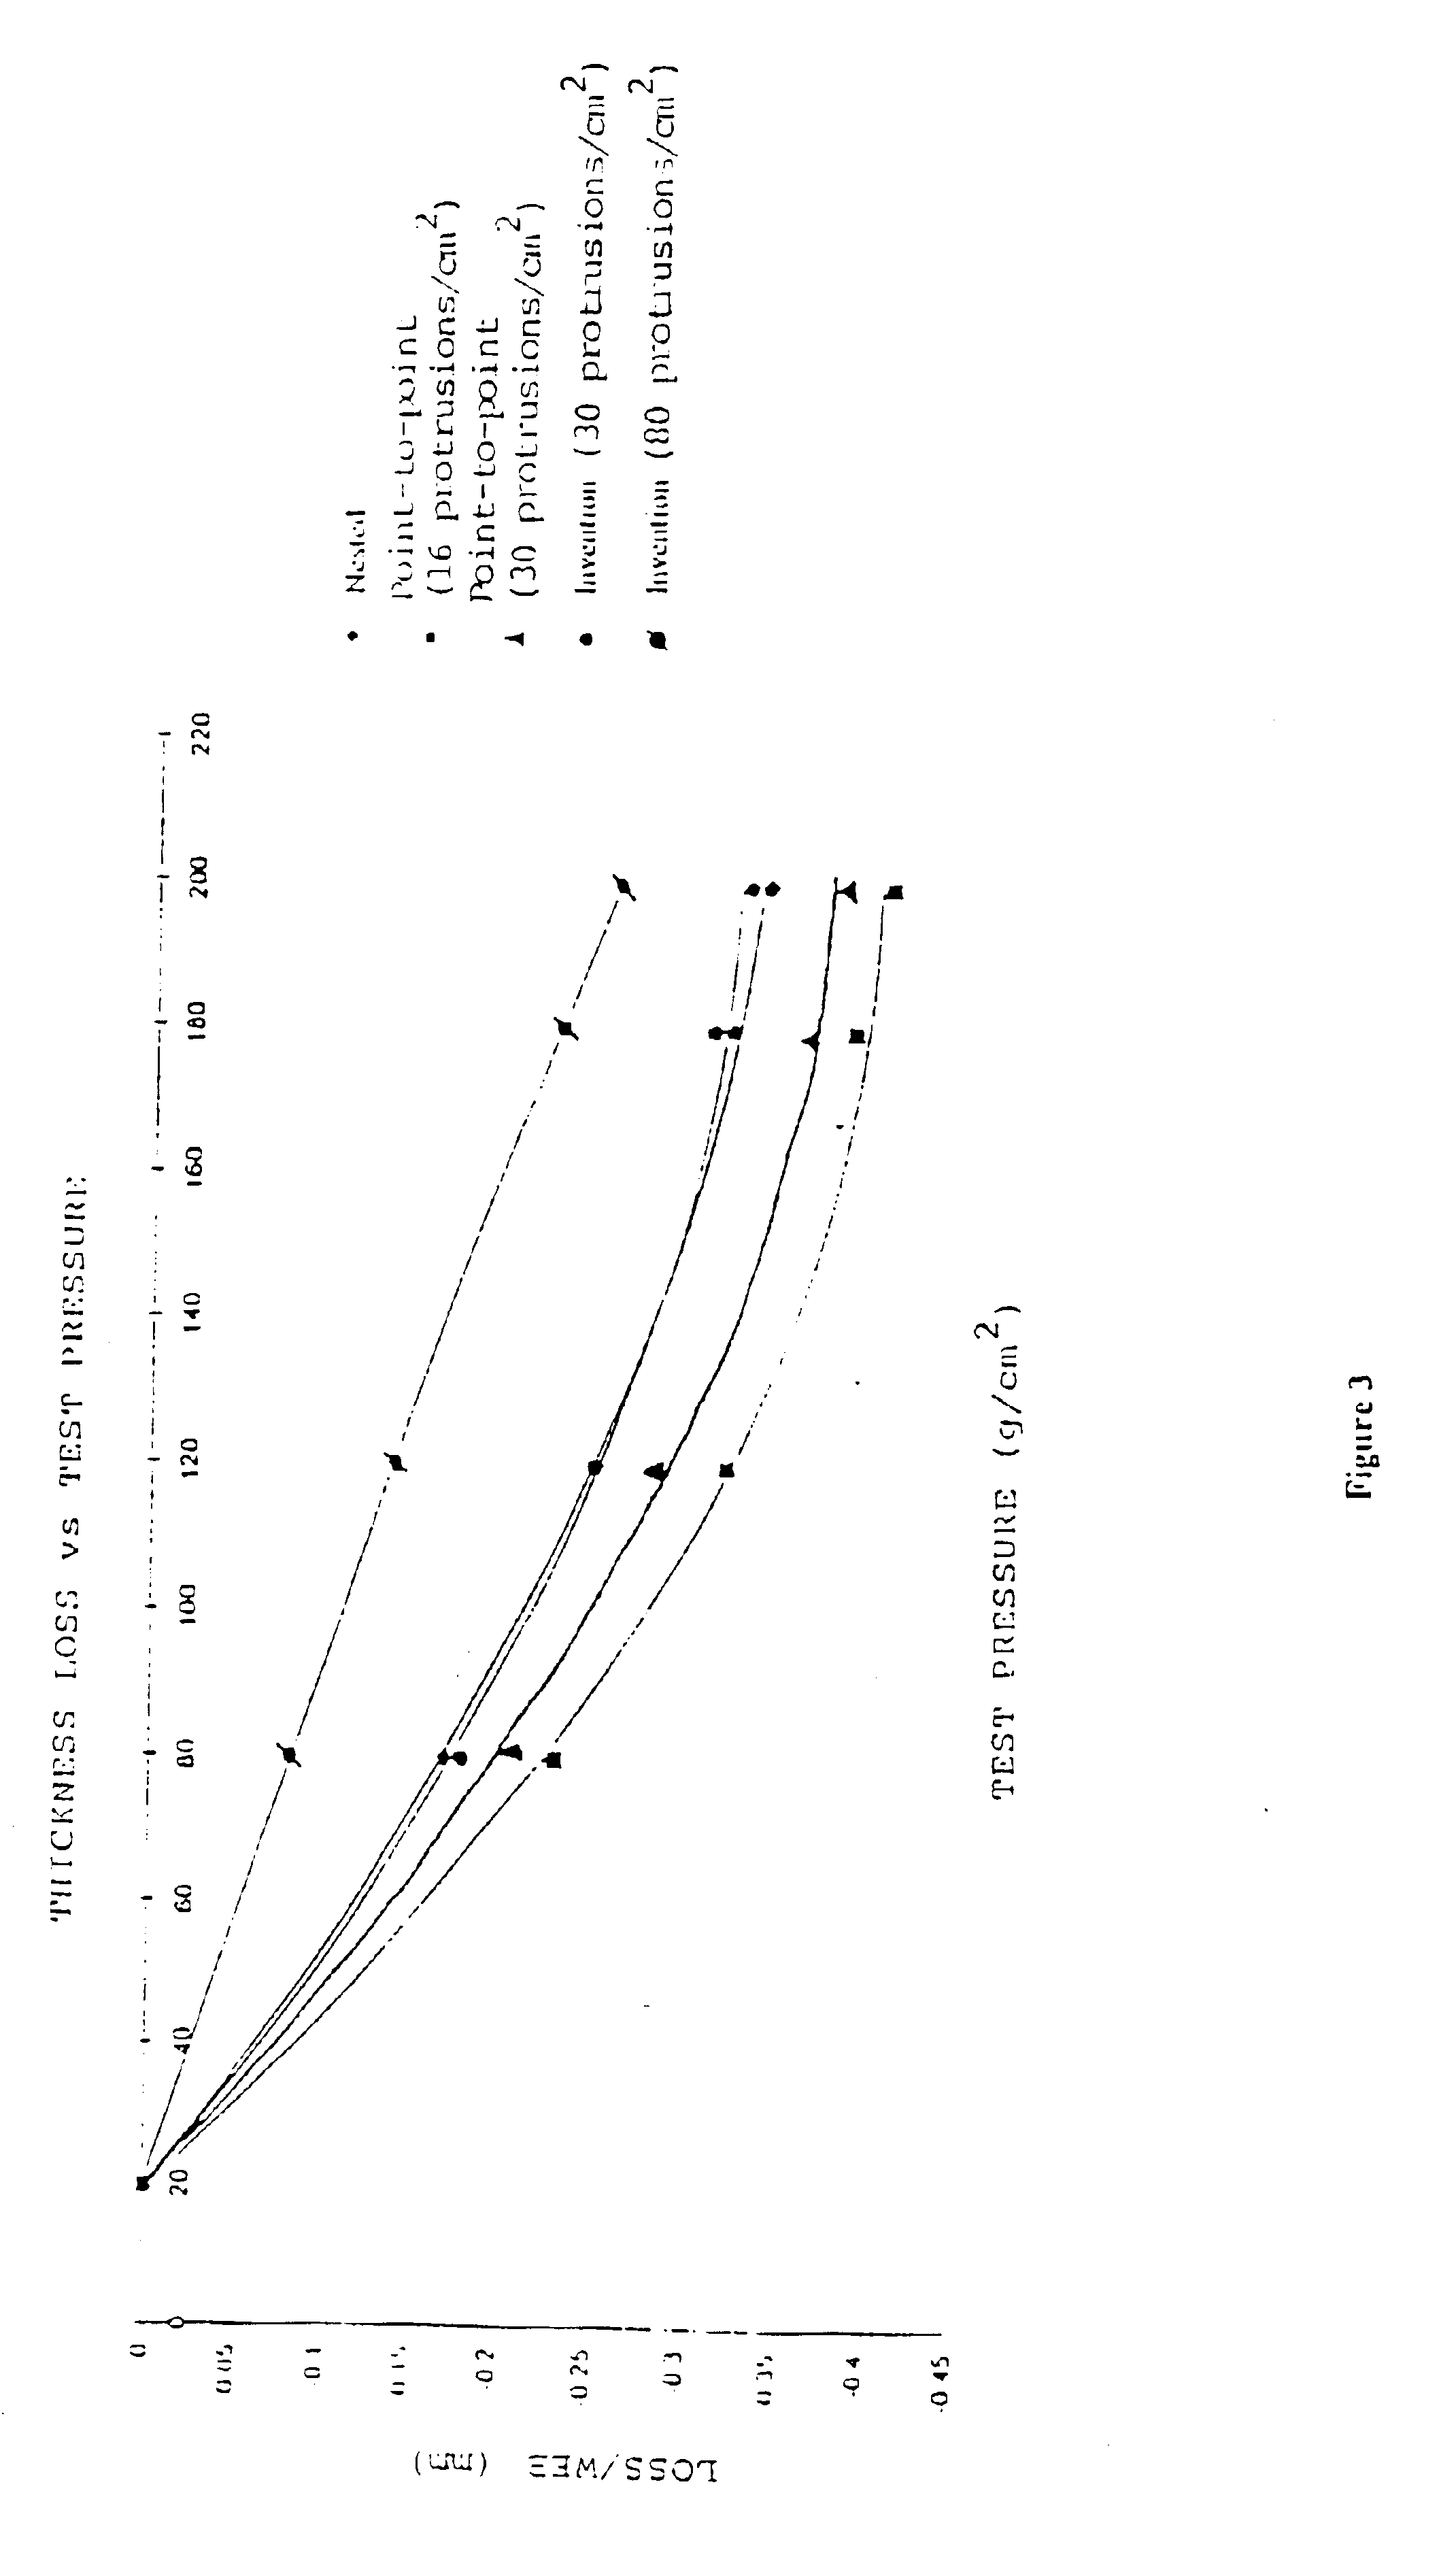 Three-ply absorbent paper product and method of making